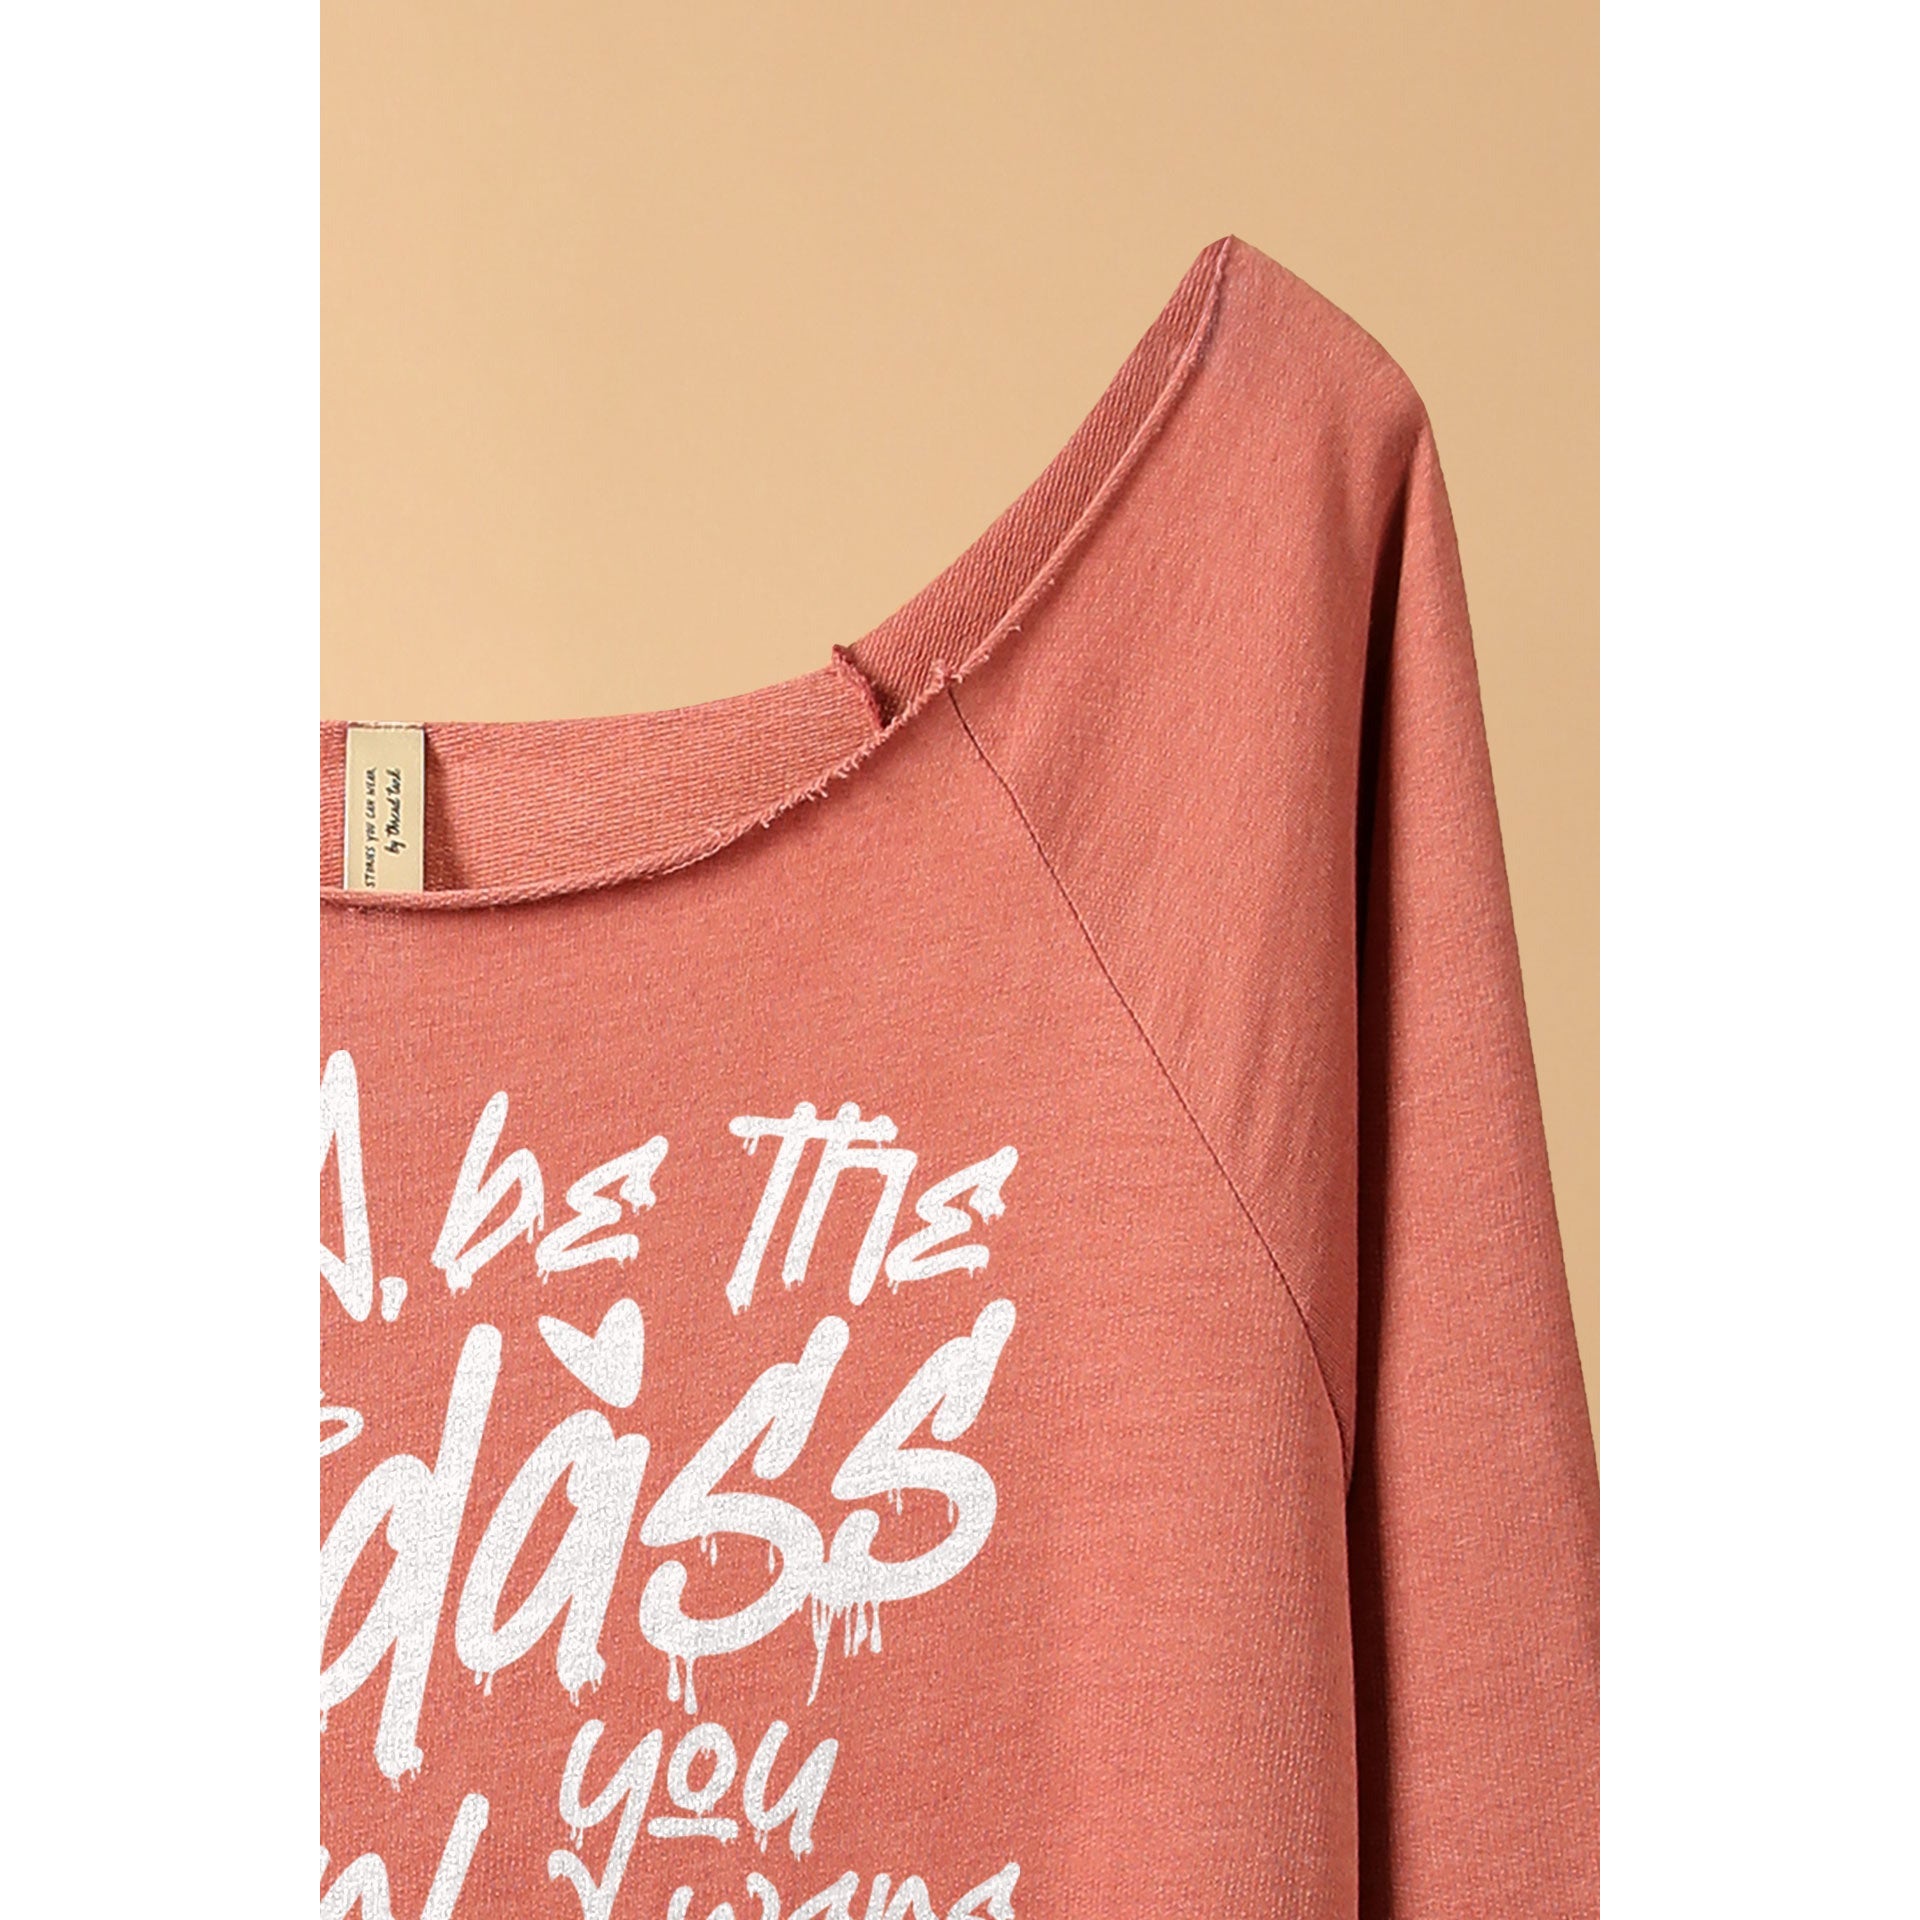 Today, Be The Badass Girl You Were Too Lazy To Be Yesterday - threadtank | stories you can wear